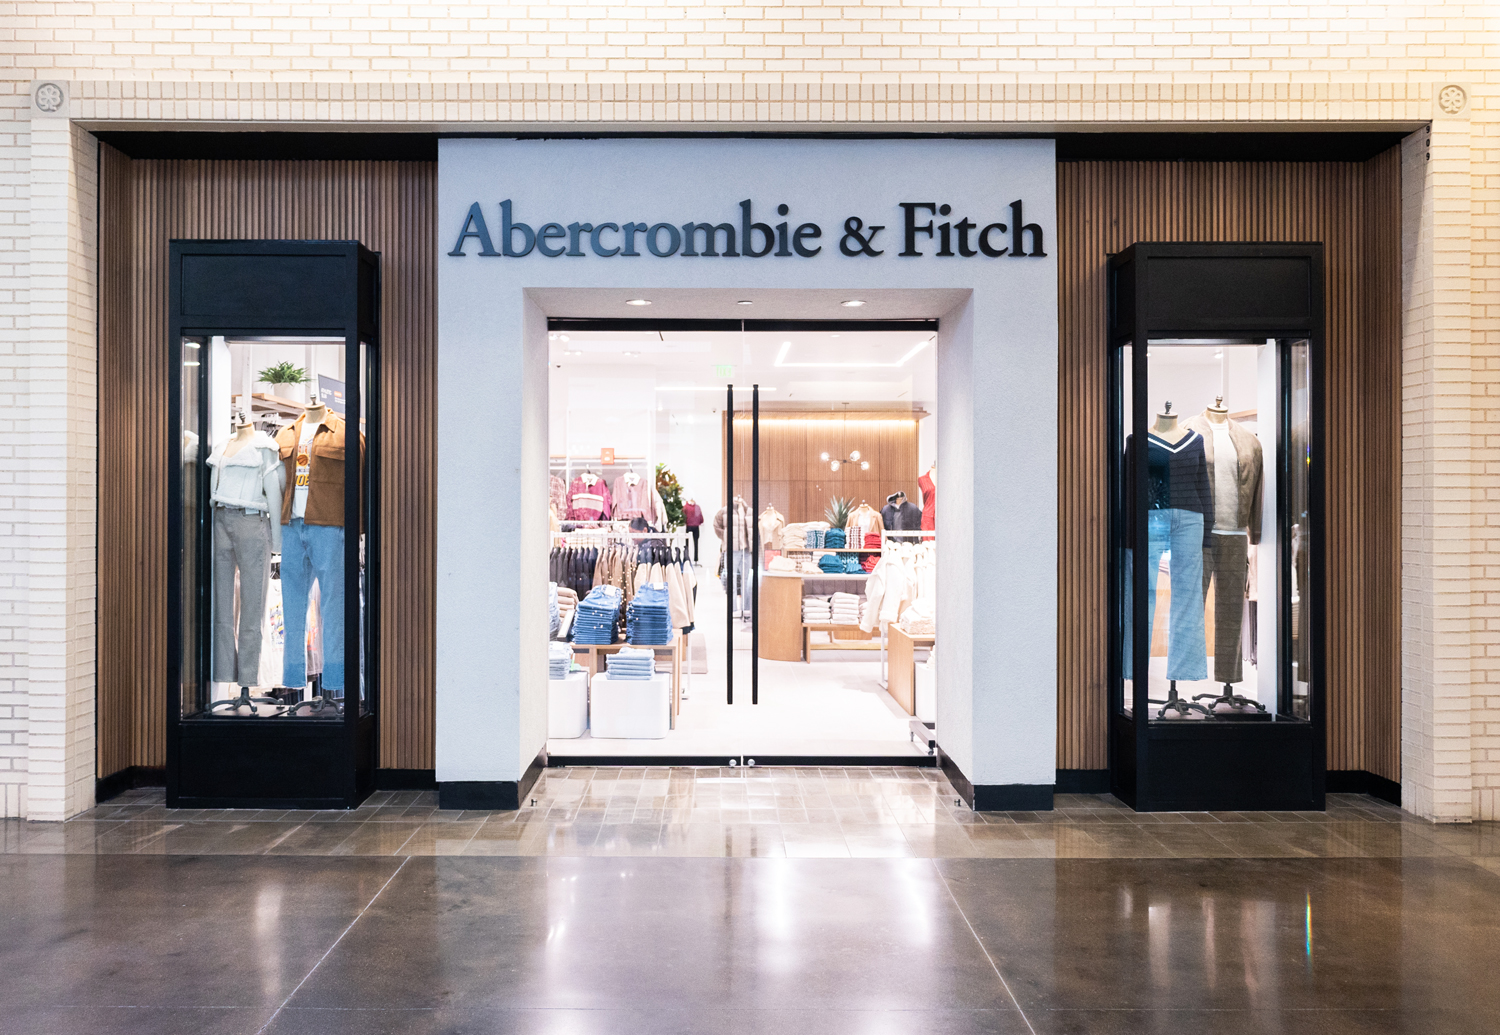 Abercrombie & Fitch Documentary Exposes its Checkered Past